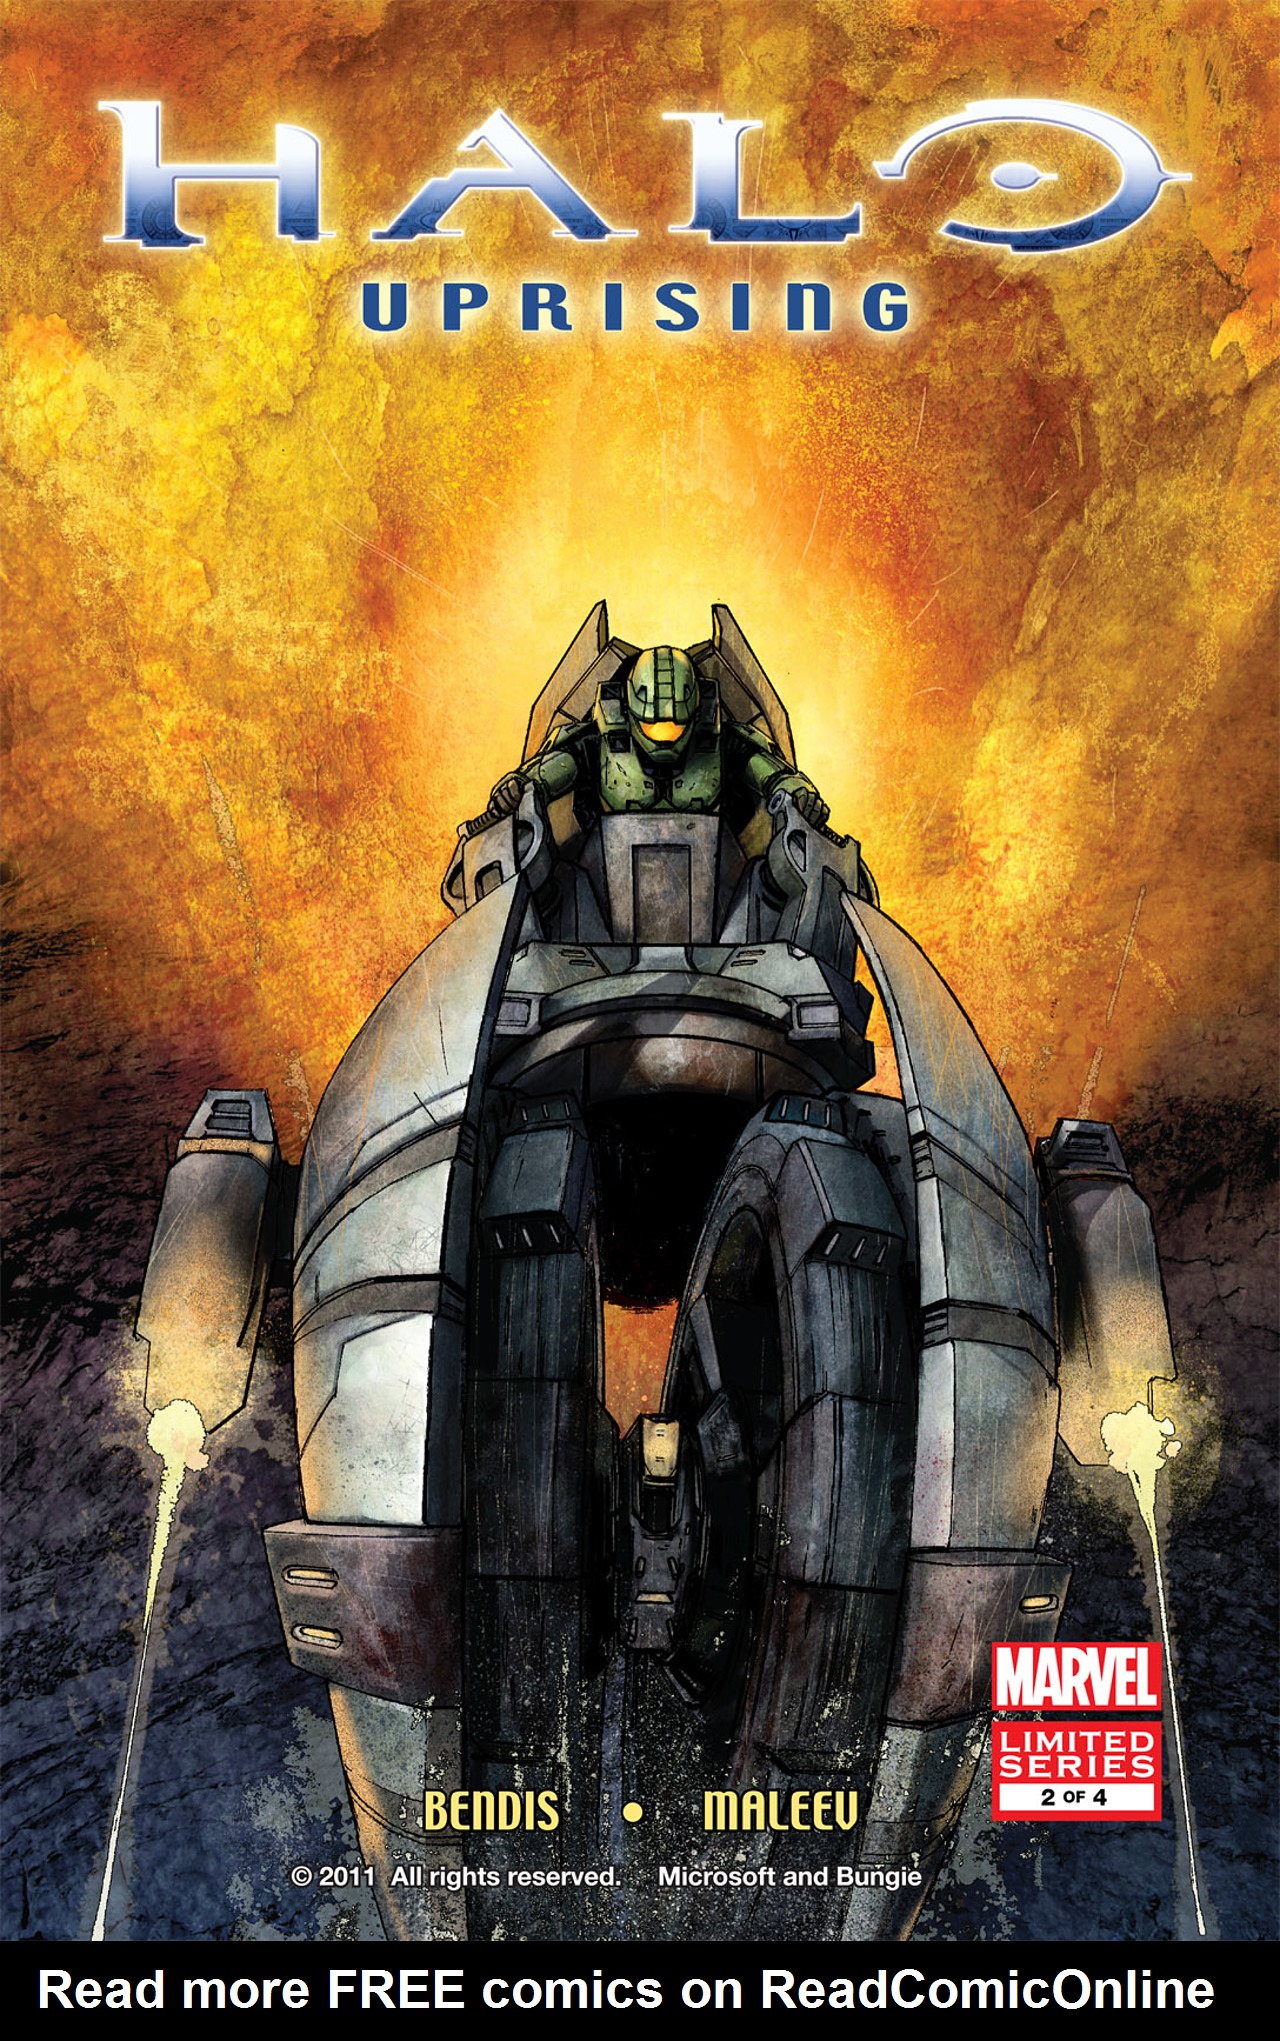 Read online Halo: Uprising comic -  Issue # TPB - 33